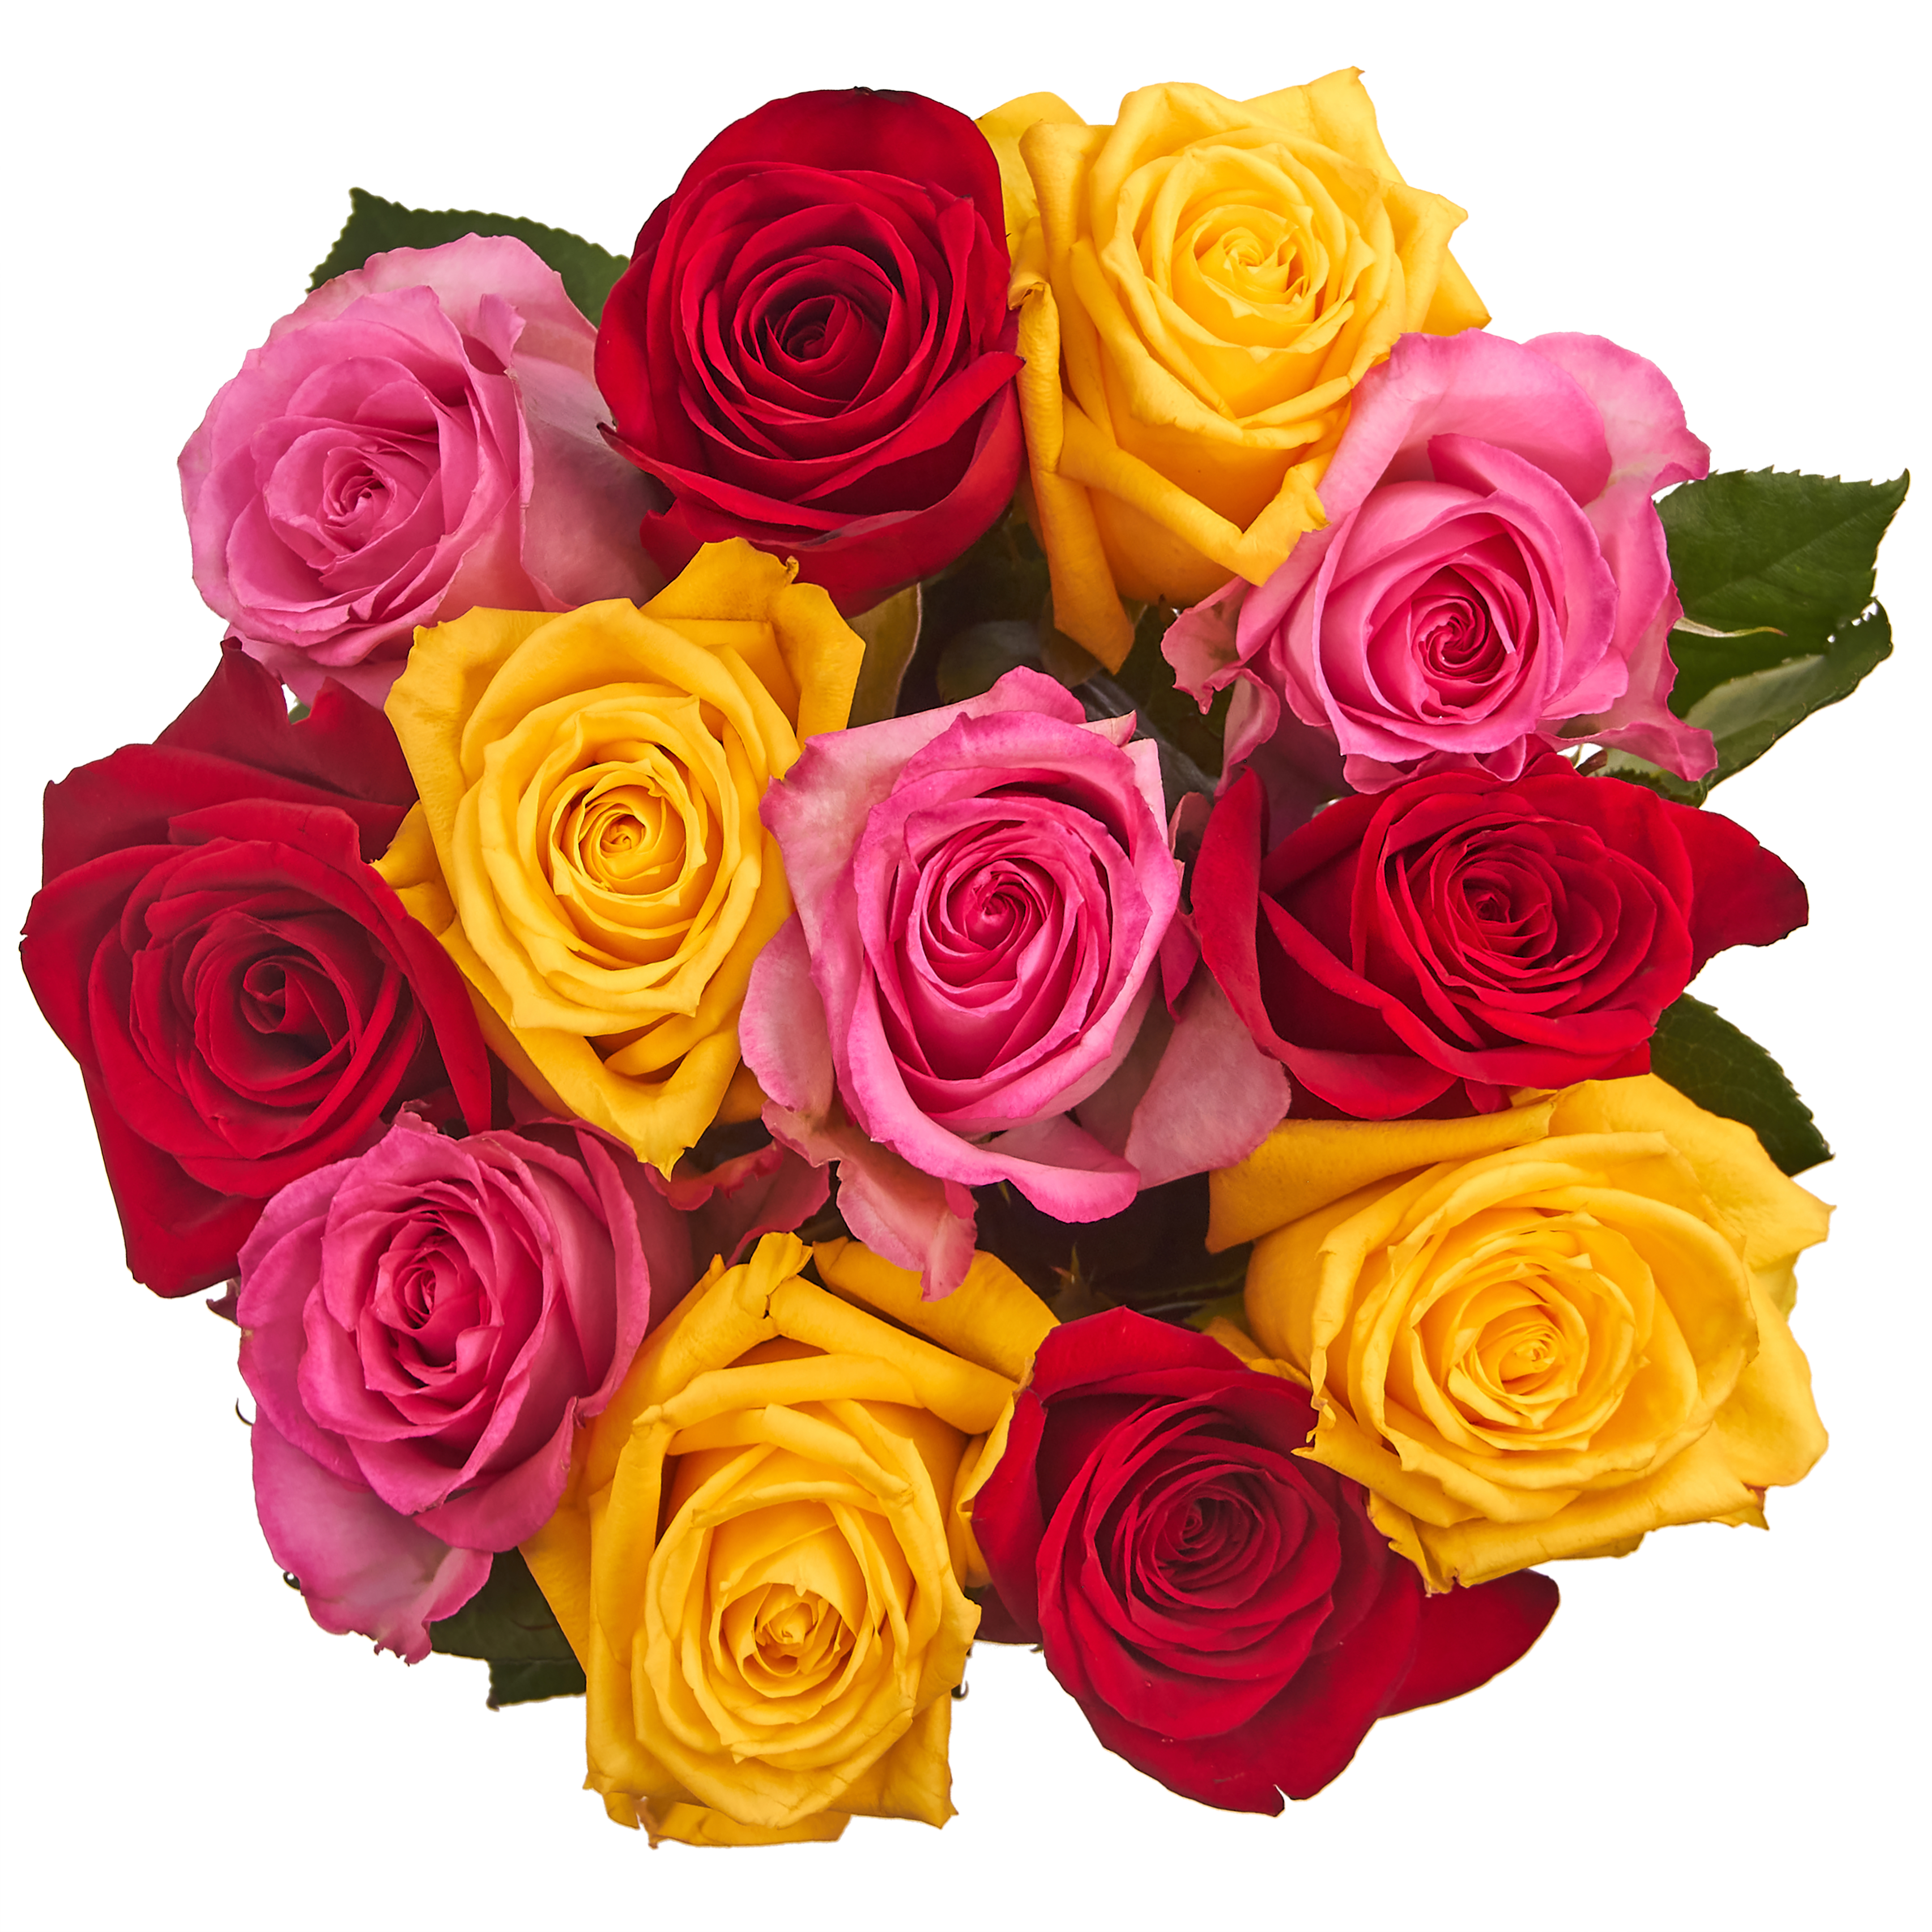 Fresh-Cut Dozen Roses, 12 Stems Assorted Rainbow Colors, Colors Vary - image 3 of 10